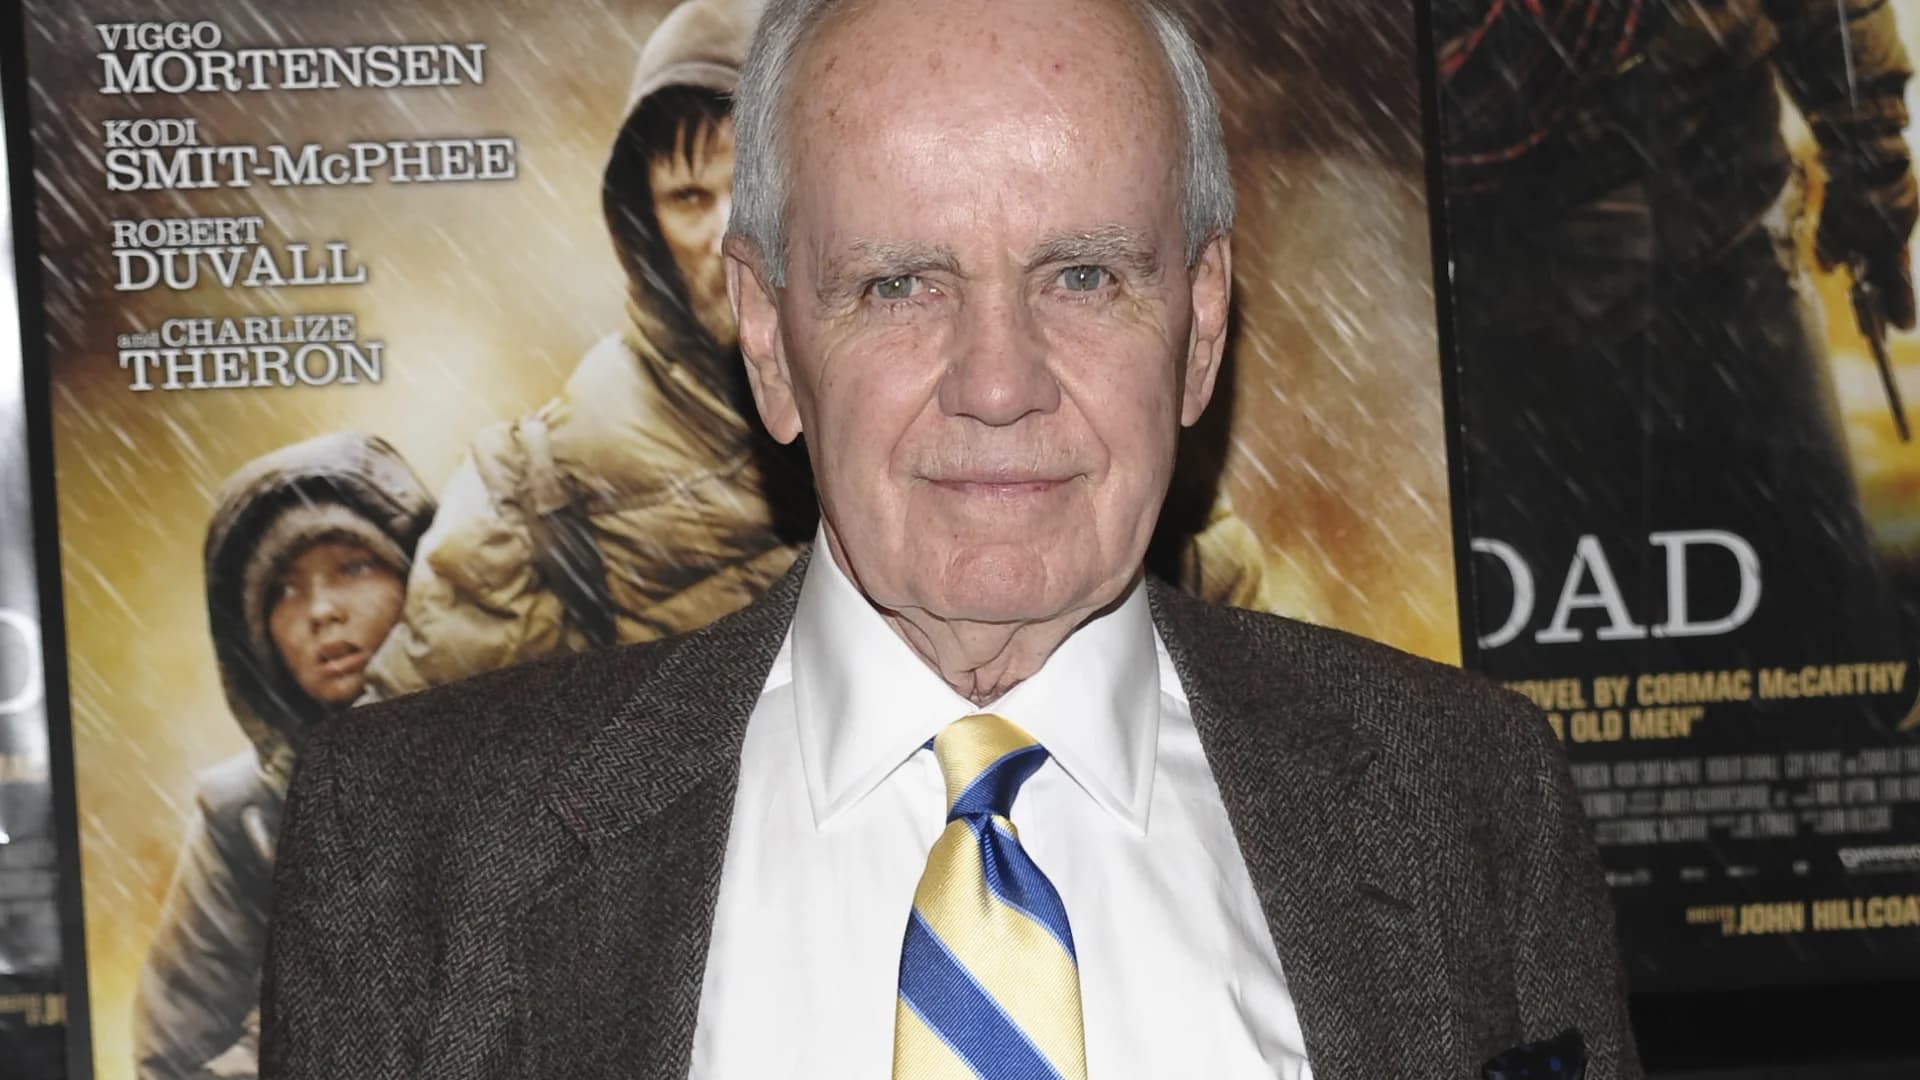 ‘The Road’ and ‘No Country for Old Men’ author Cormac McCarthy dies at 89